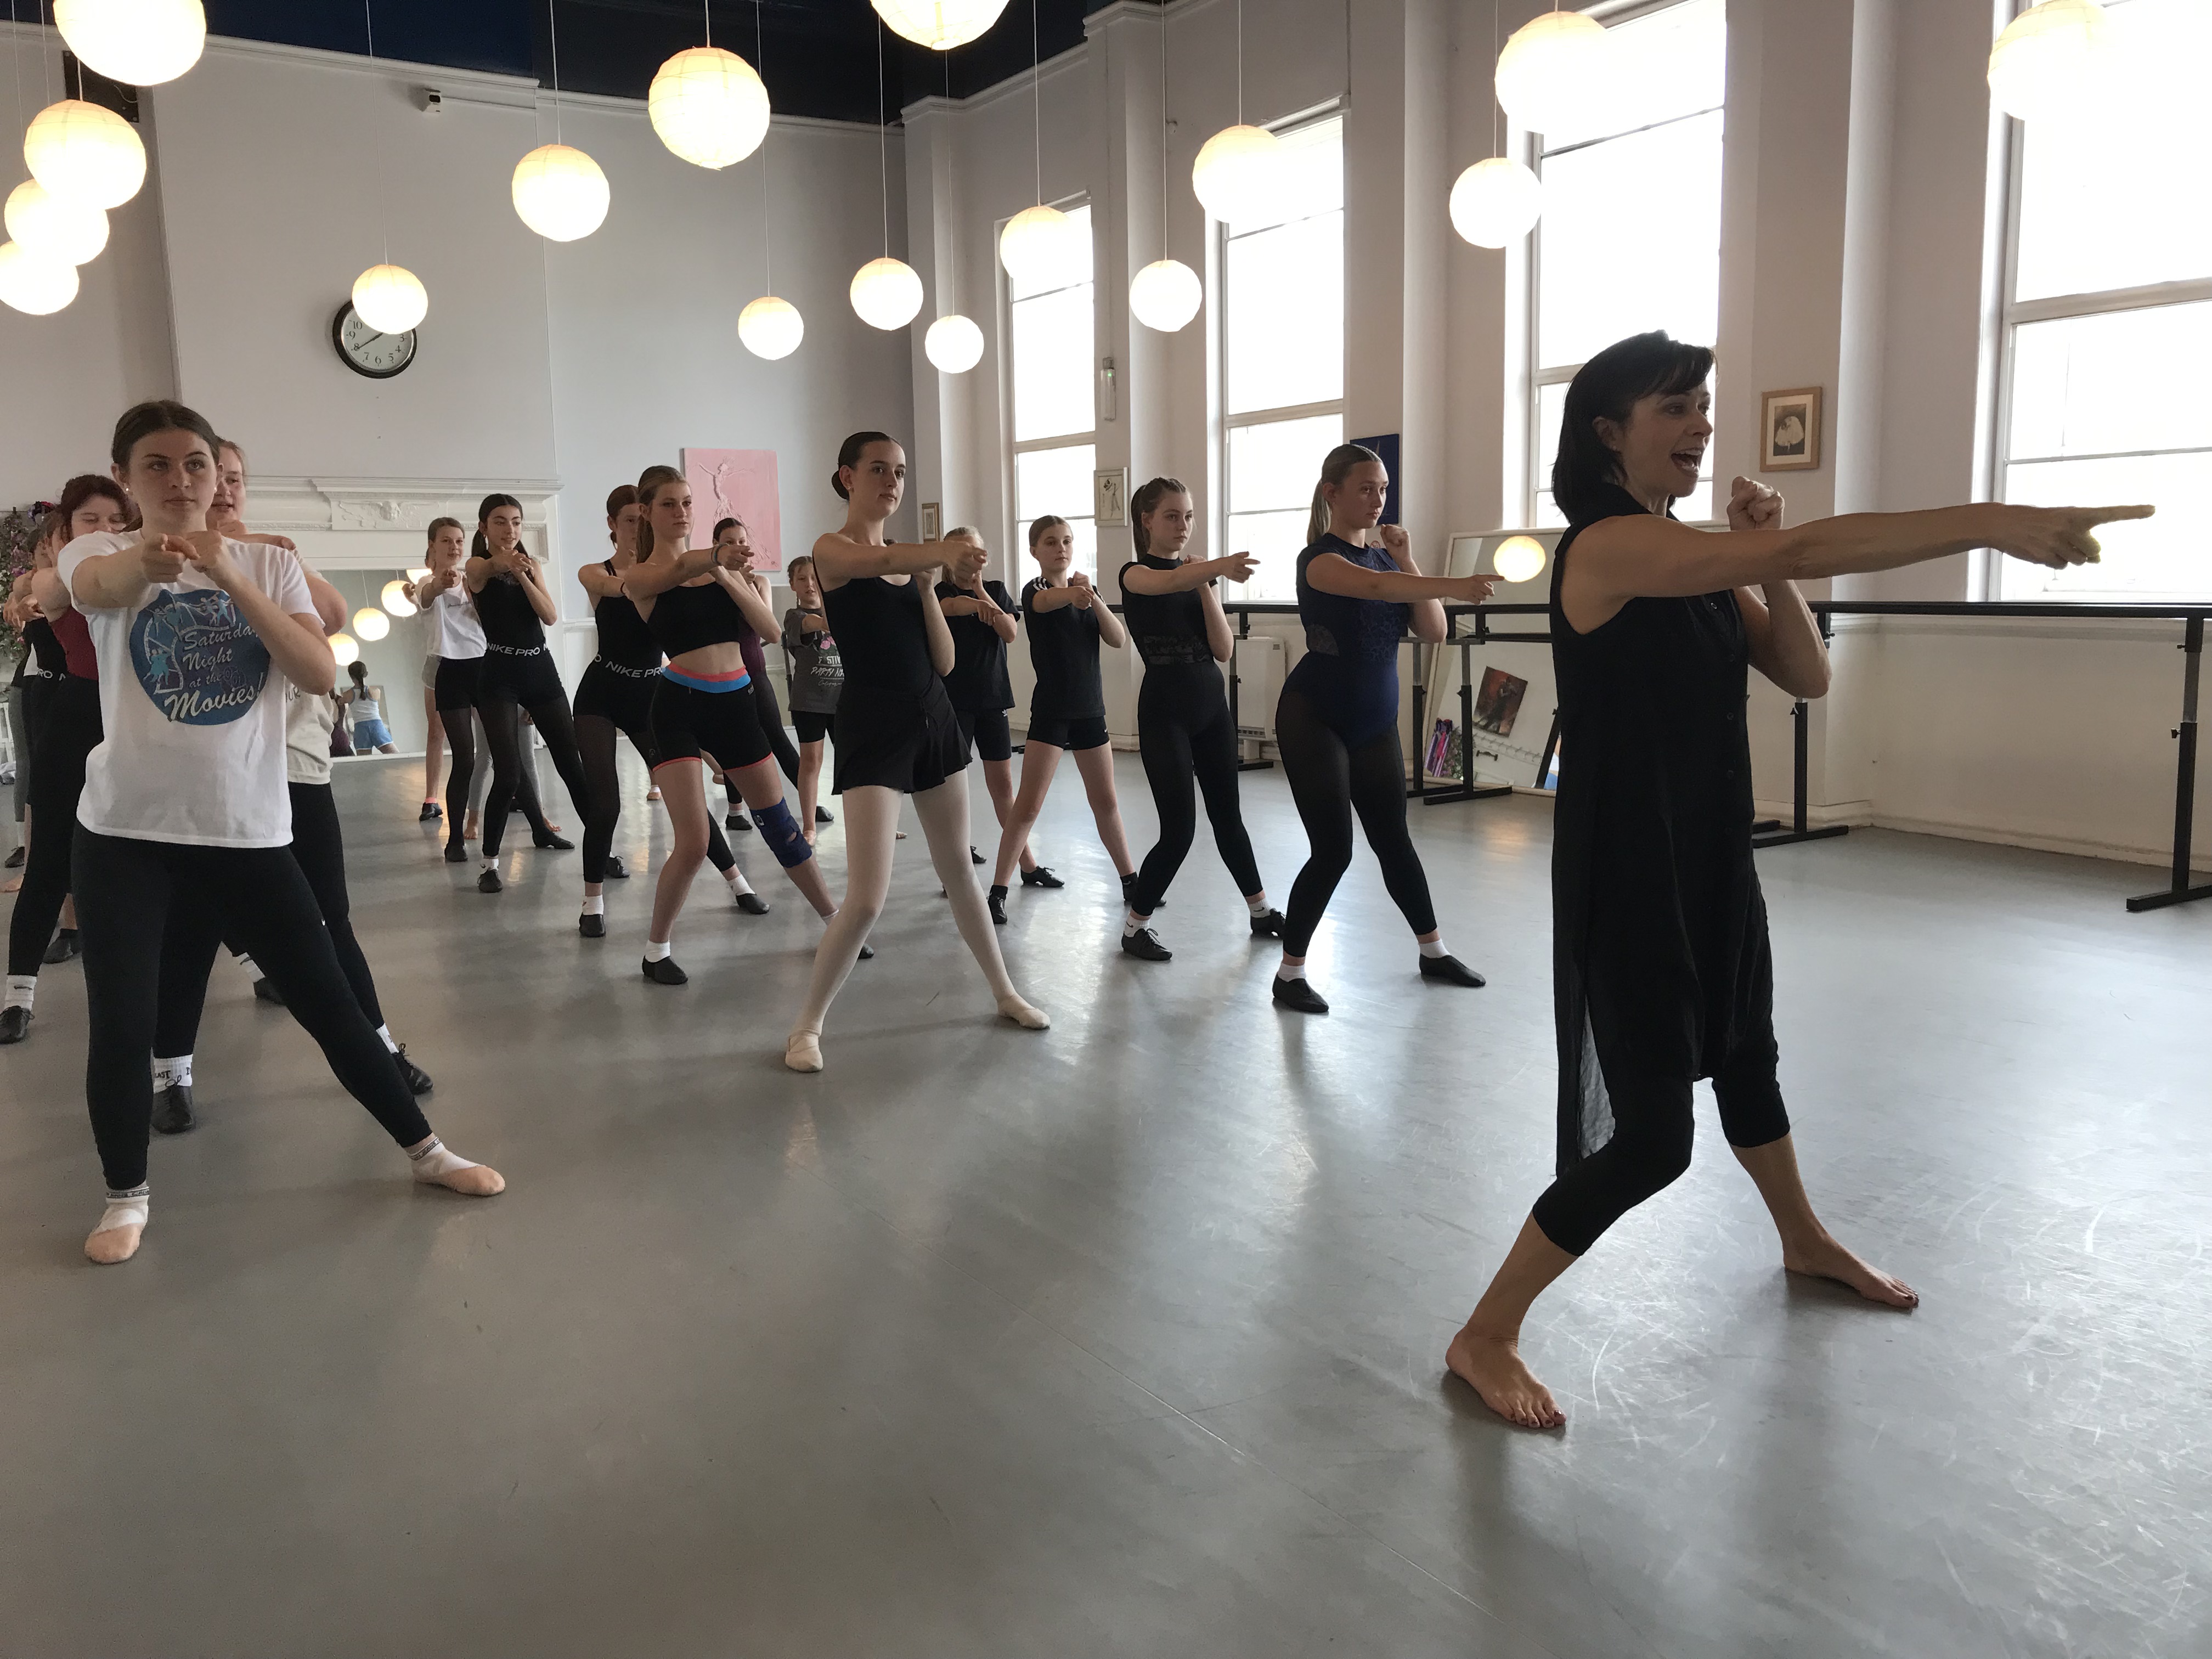 Students working with Helen Anker during a Mamma Mia workshop